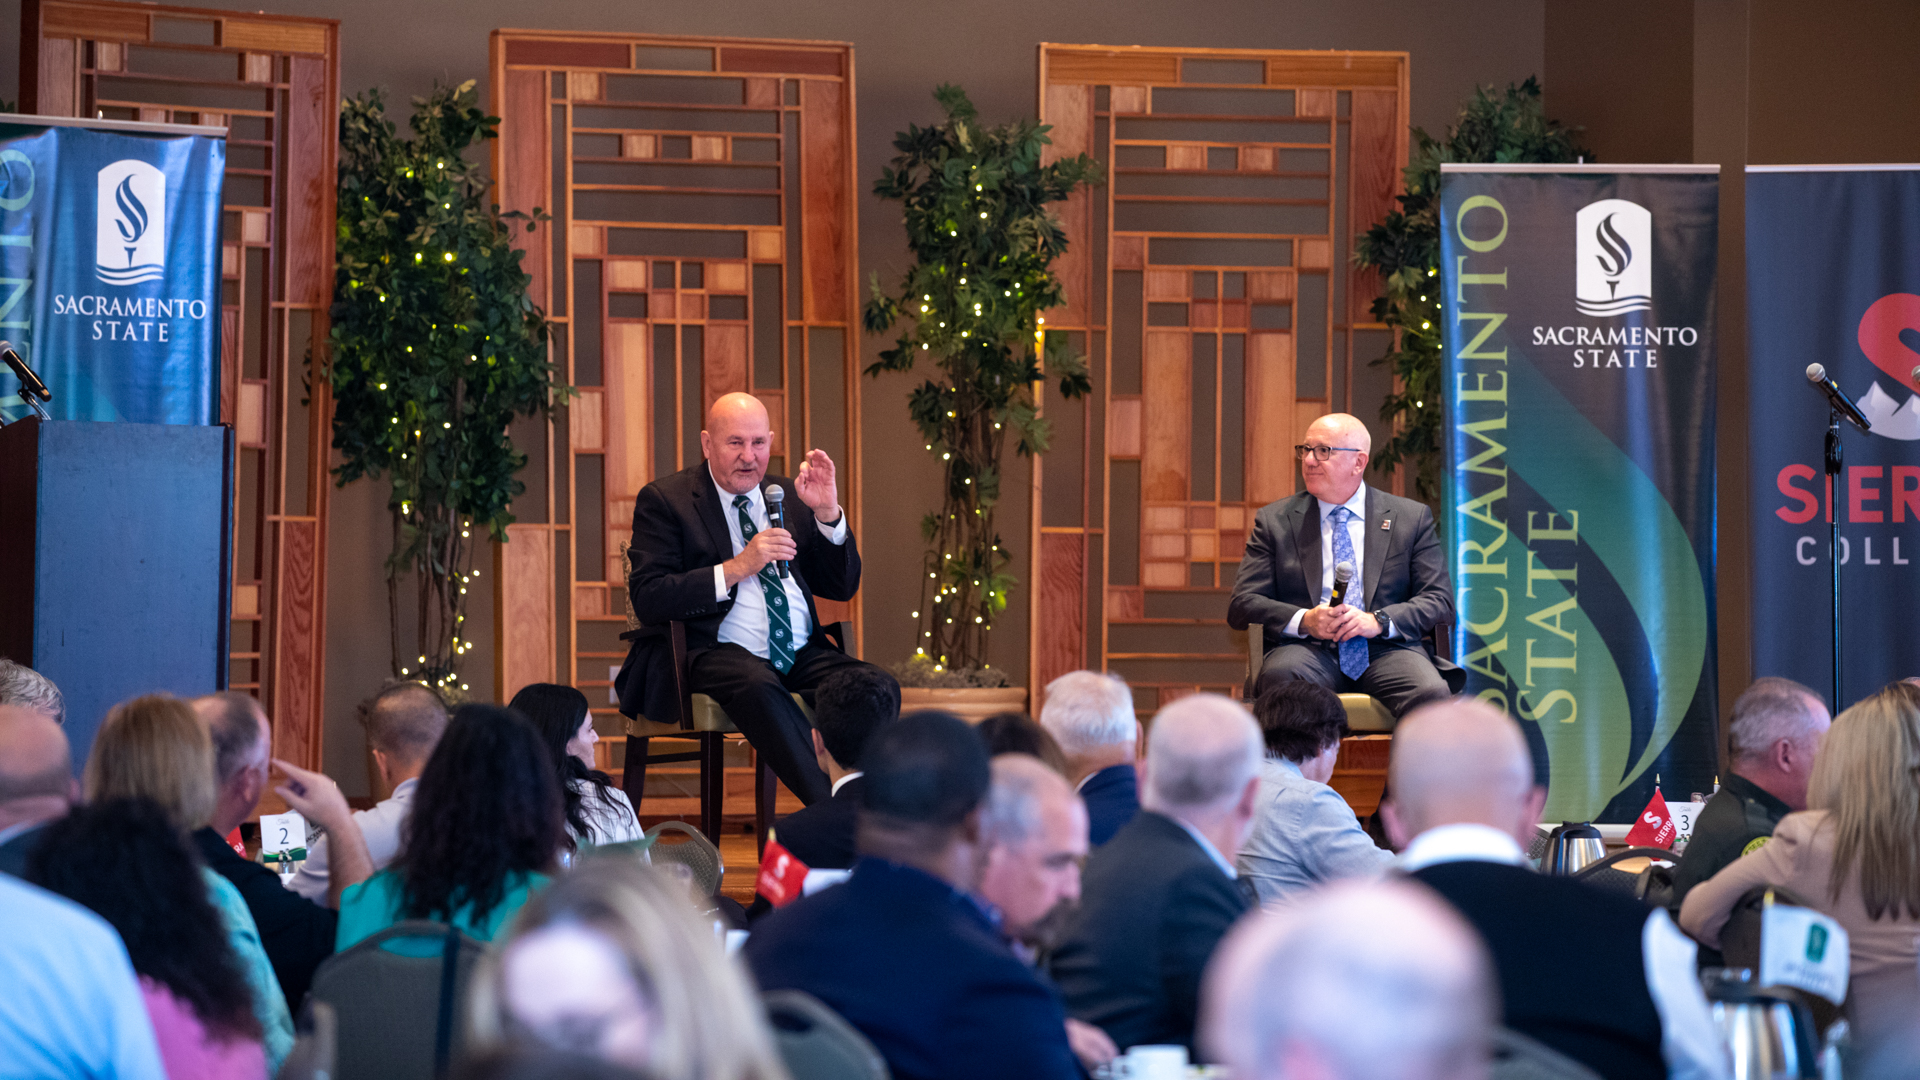 Sac State President Robert S. Nelsen and Sierra College President Willy Duncan speak on stage next to banners during a luncheon at the Placer One groundbreaking event.